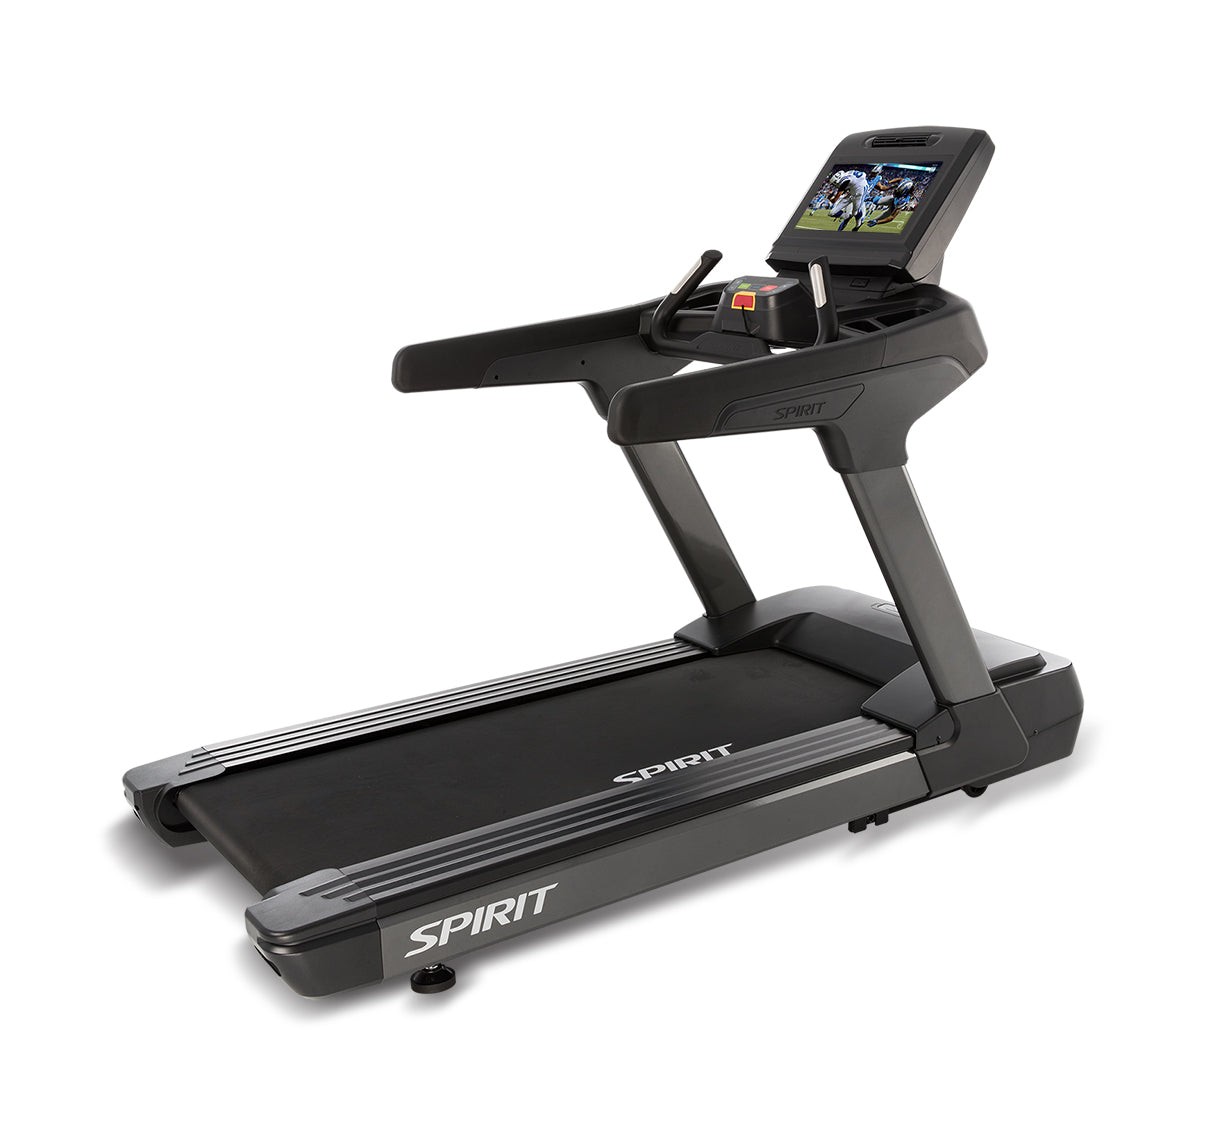 Spirit Fitness CT900 ENT Treadmill with 15.6" Touchscreen (Black)